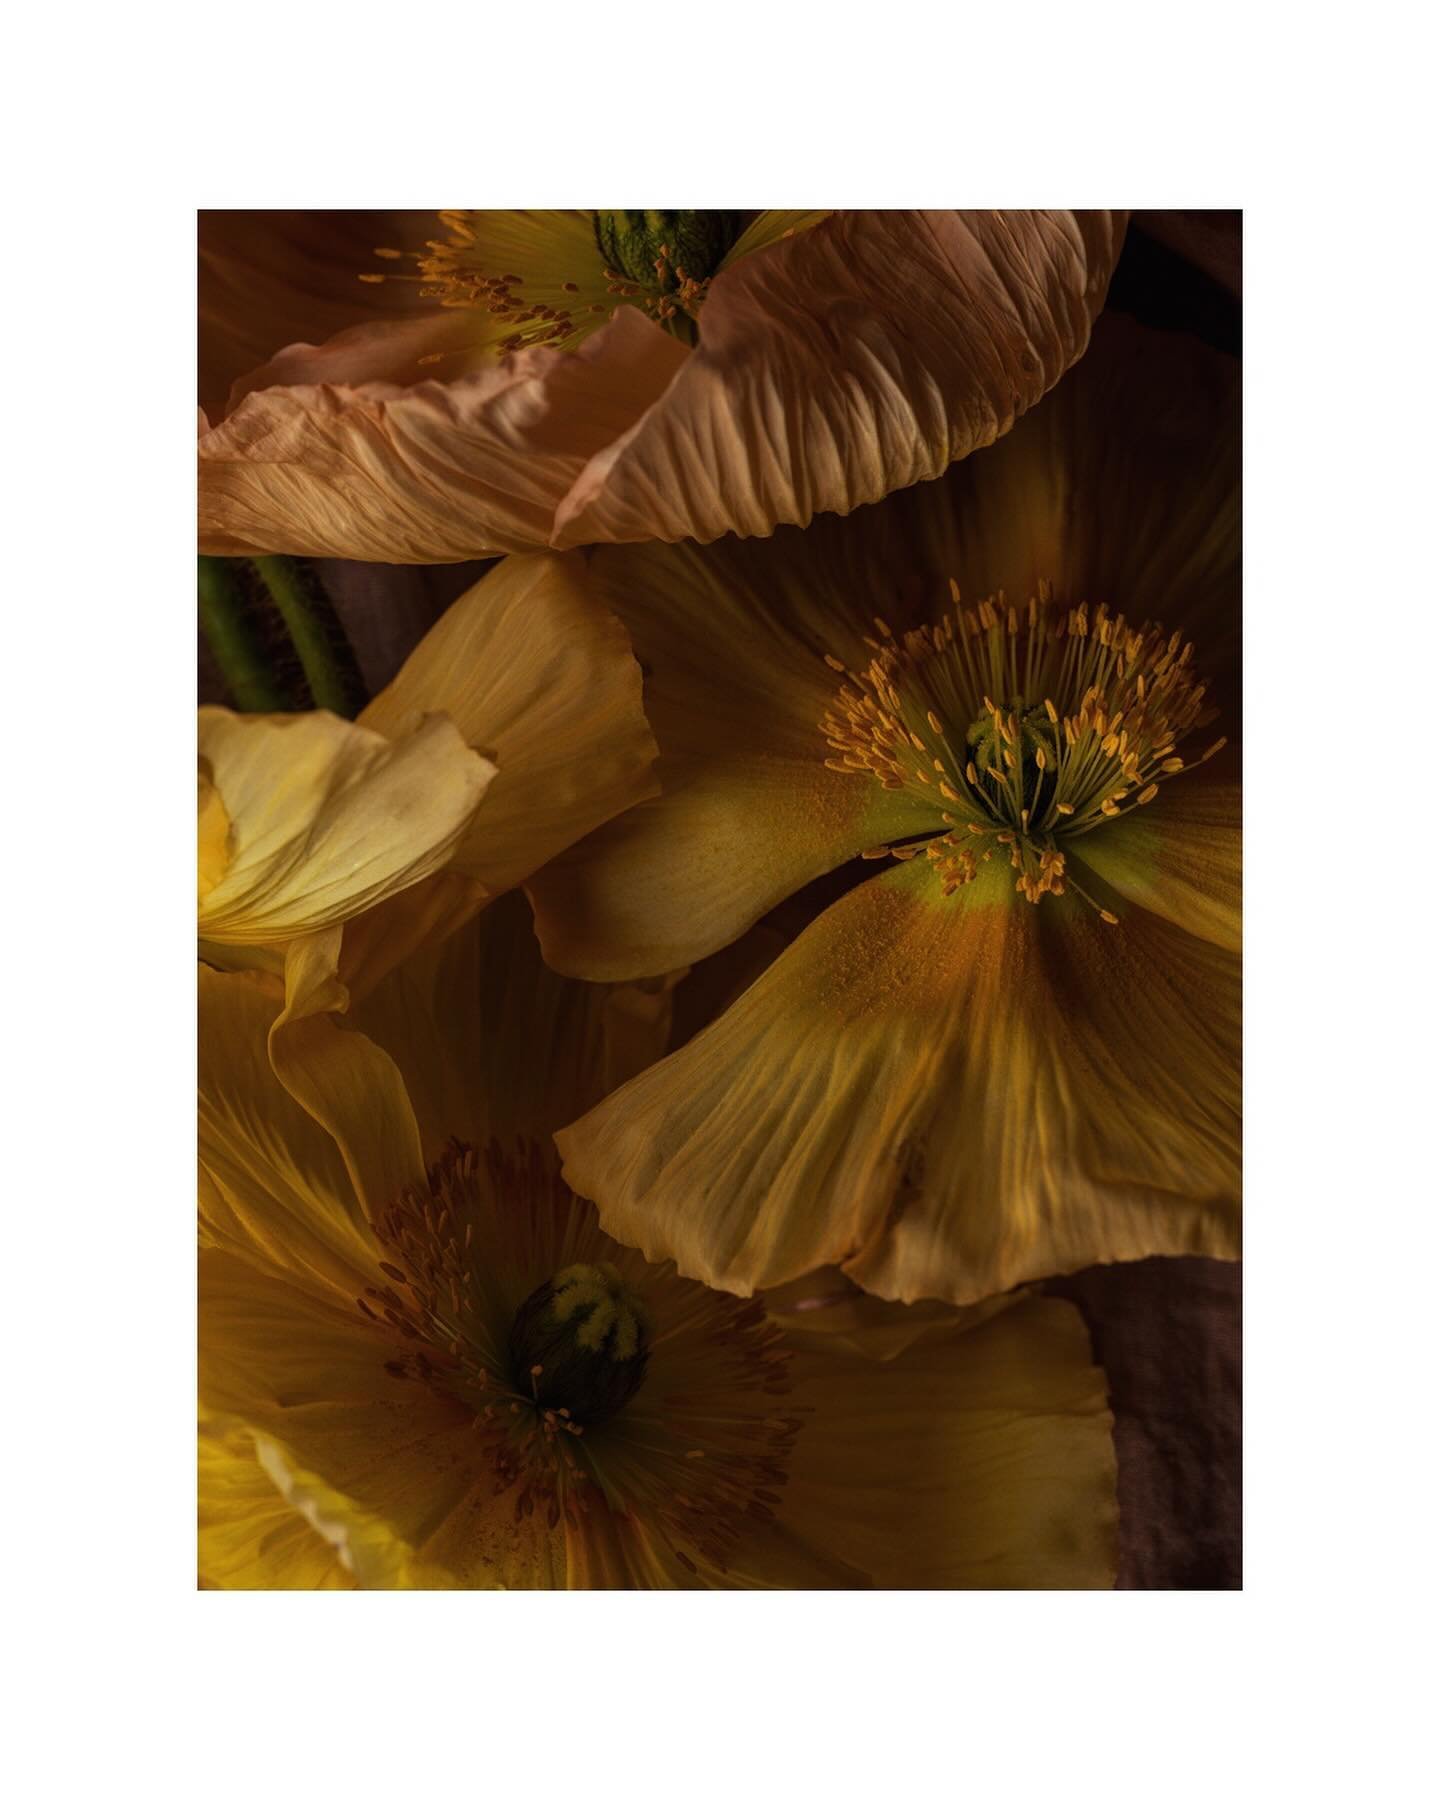 new flower series
#springflowers #work #floraldesign #stylist #flowers #mood #photography #photographer #teamwork with @petrasalvisberg and her incredible sense for floral